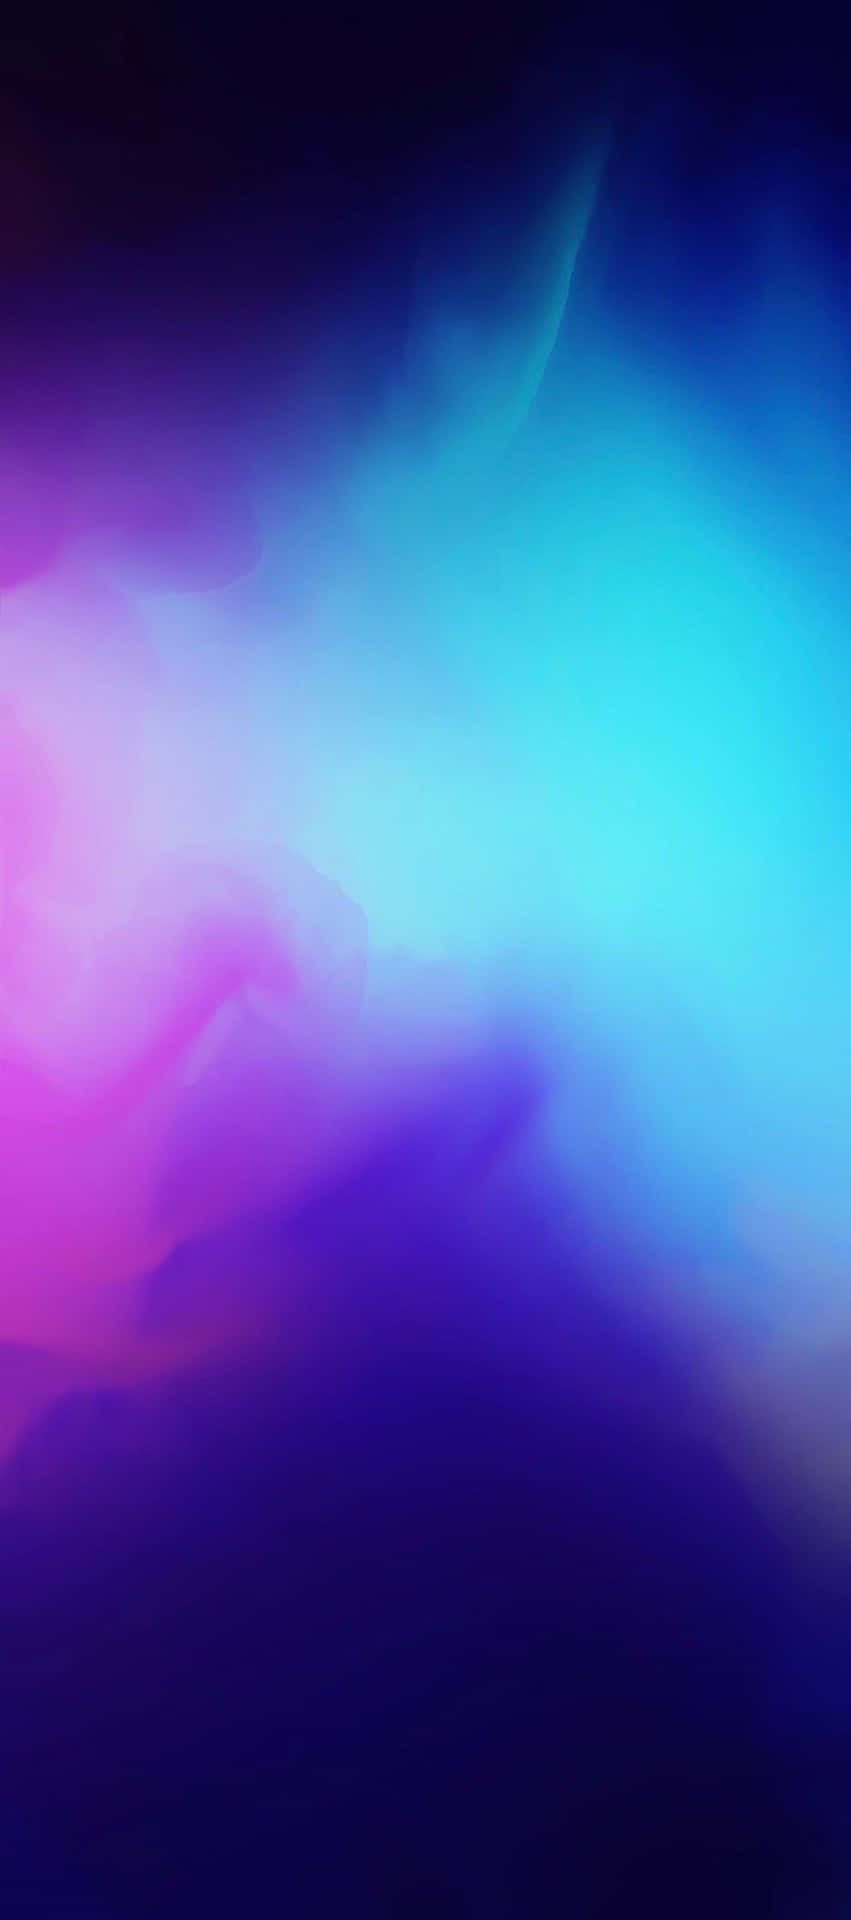 A mesmerizing purple and blue background